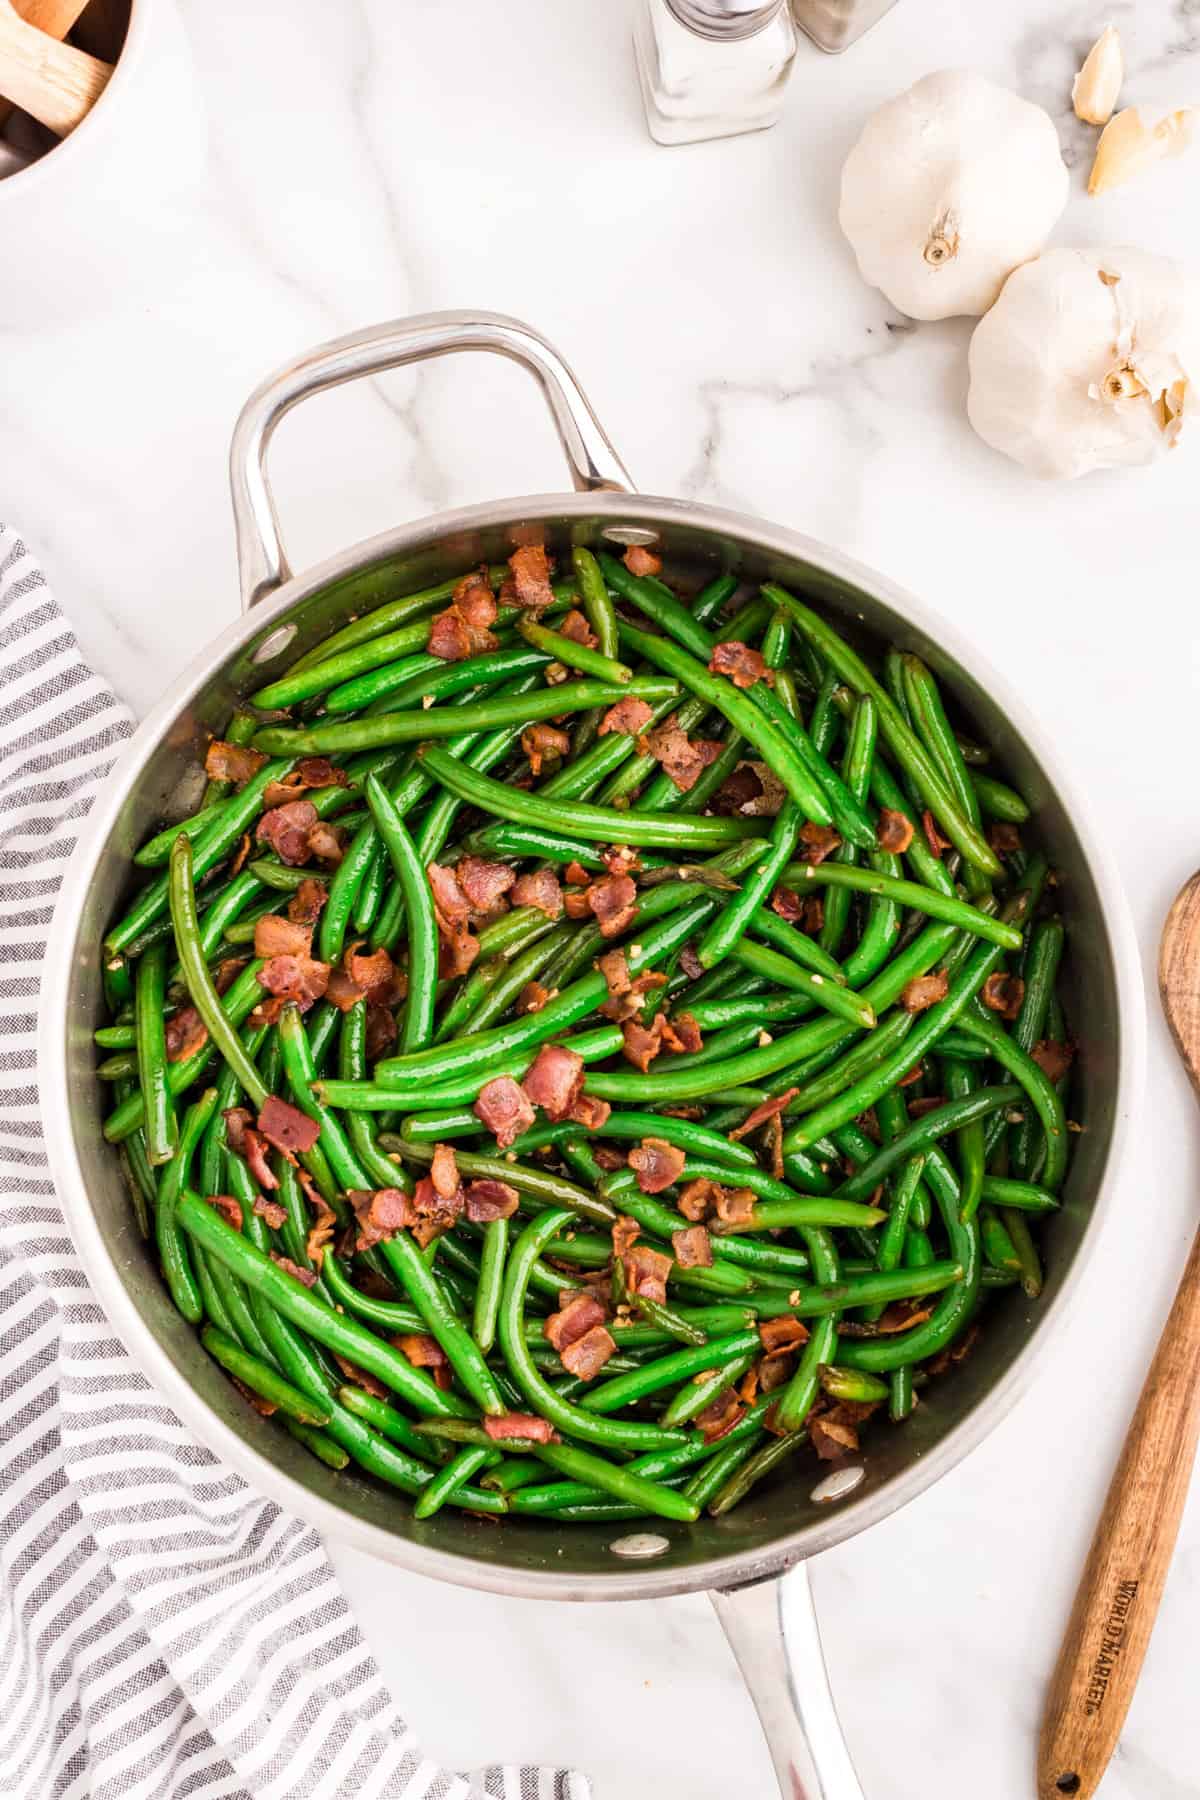 Tossed Green Beans with Bacon in stovepot skillet